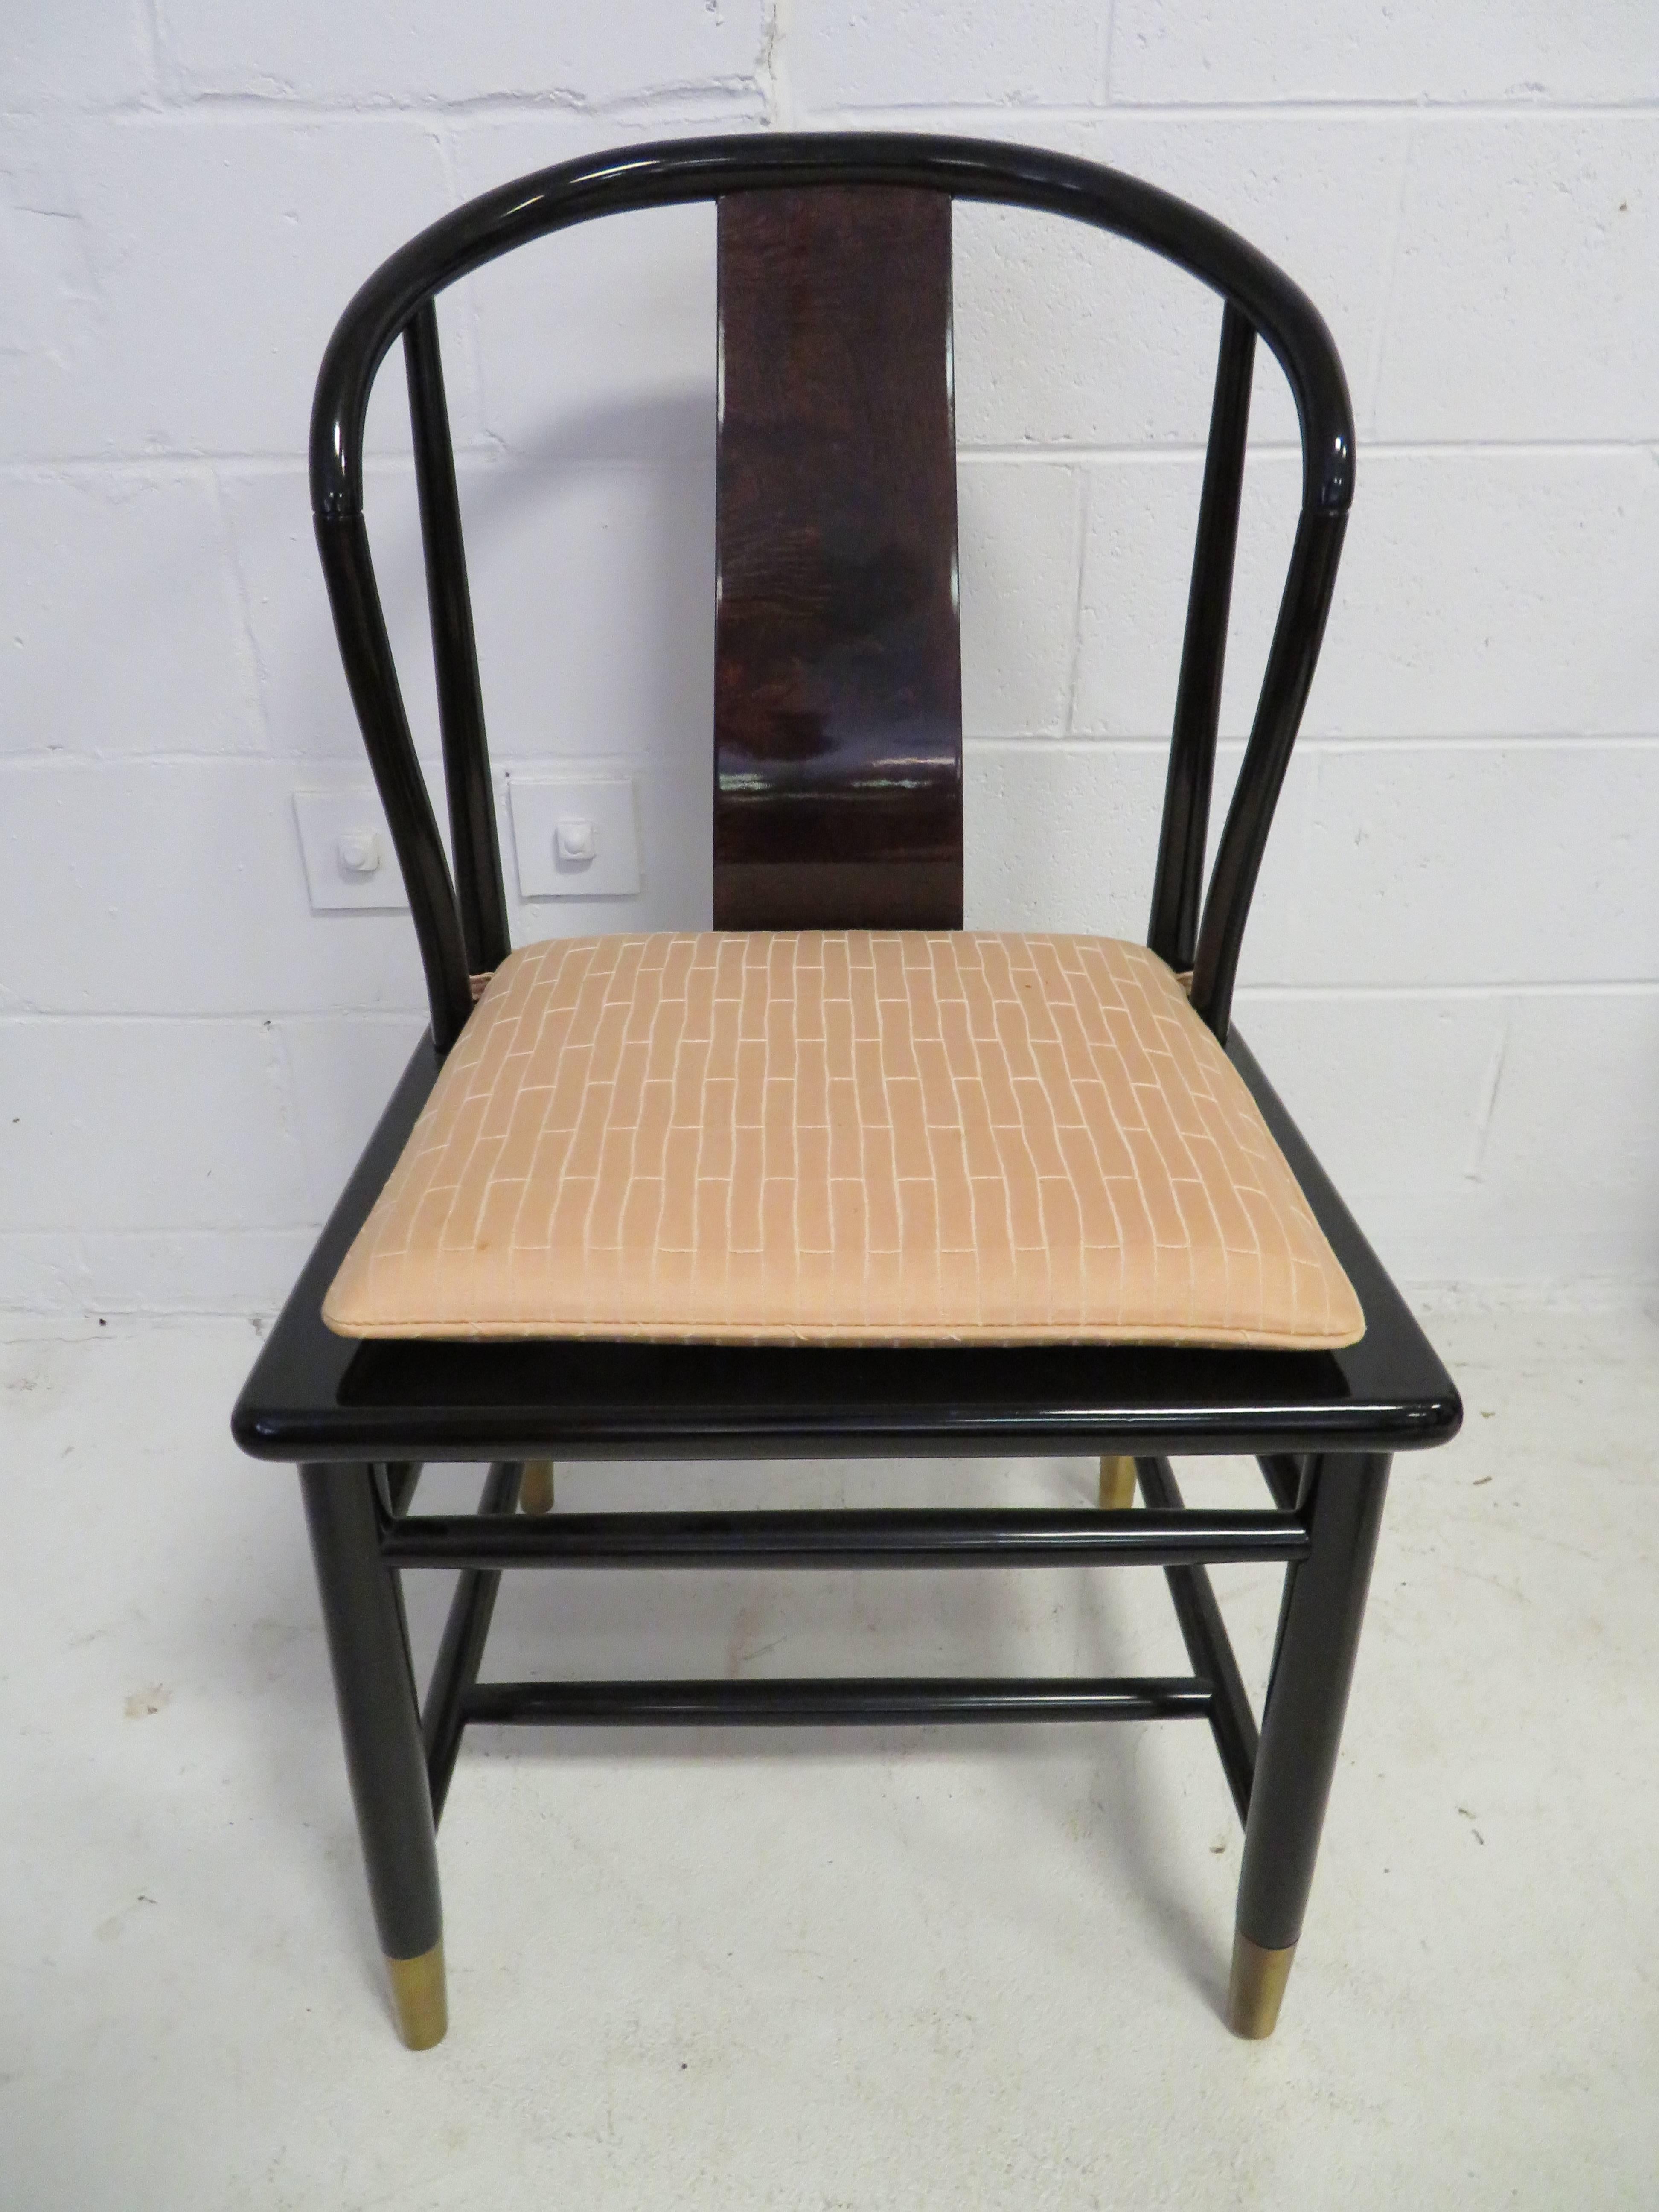 Gorgeous set of six scene three Asian style dining chairs by Henredon. Two stunning armchairs and four exquisite side chairs. Seats are rattan and all are flawless. No breaks or holes. Seat pad do show wear with some spots. Overall condition of wood